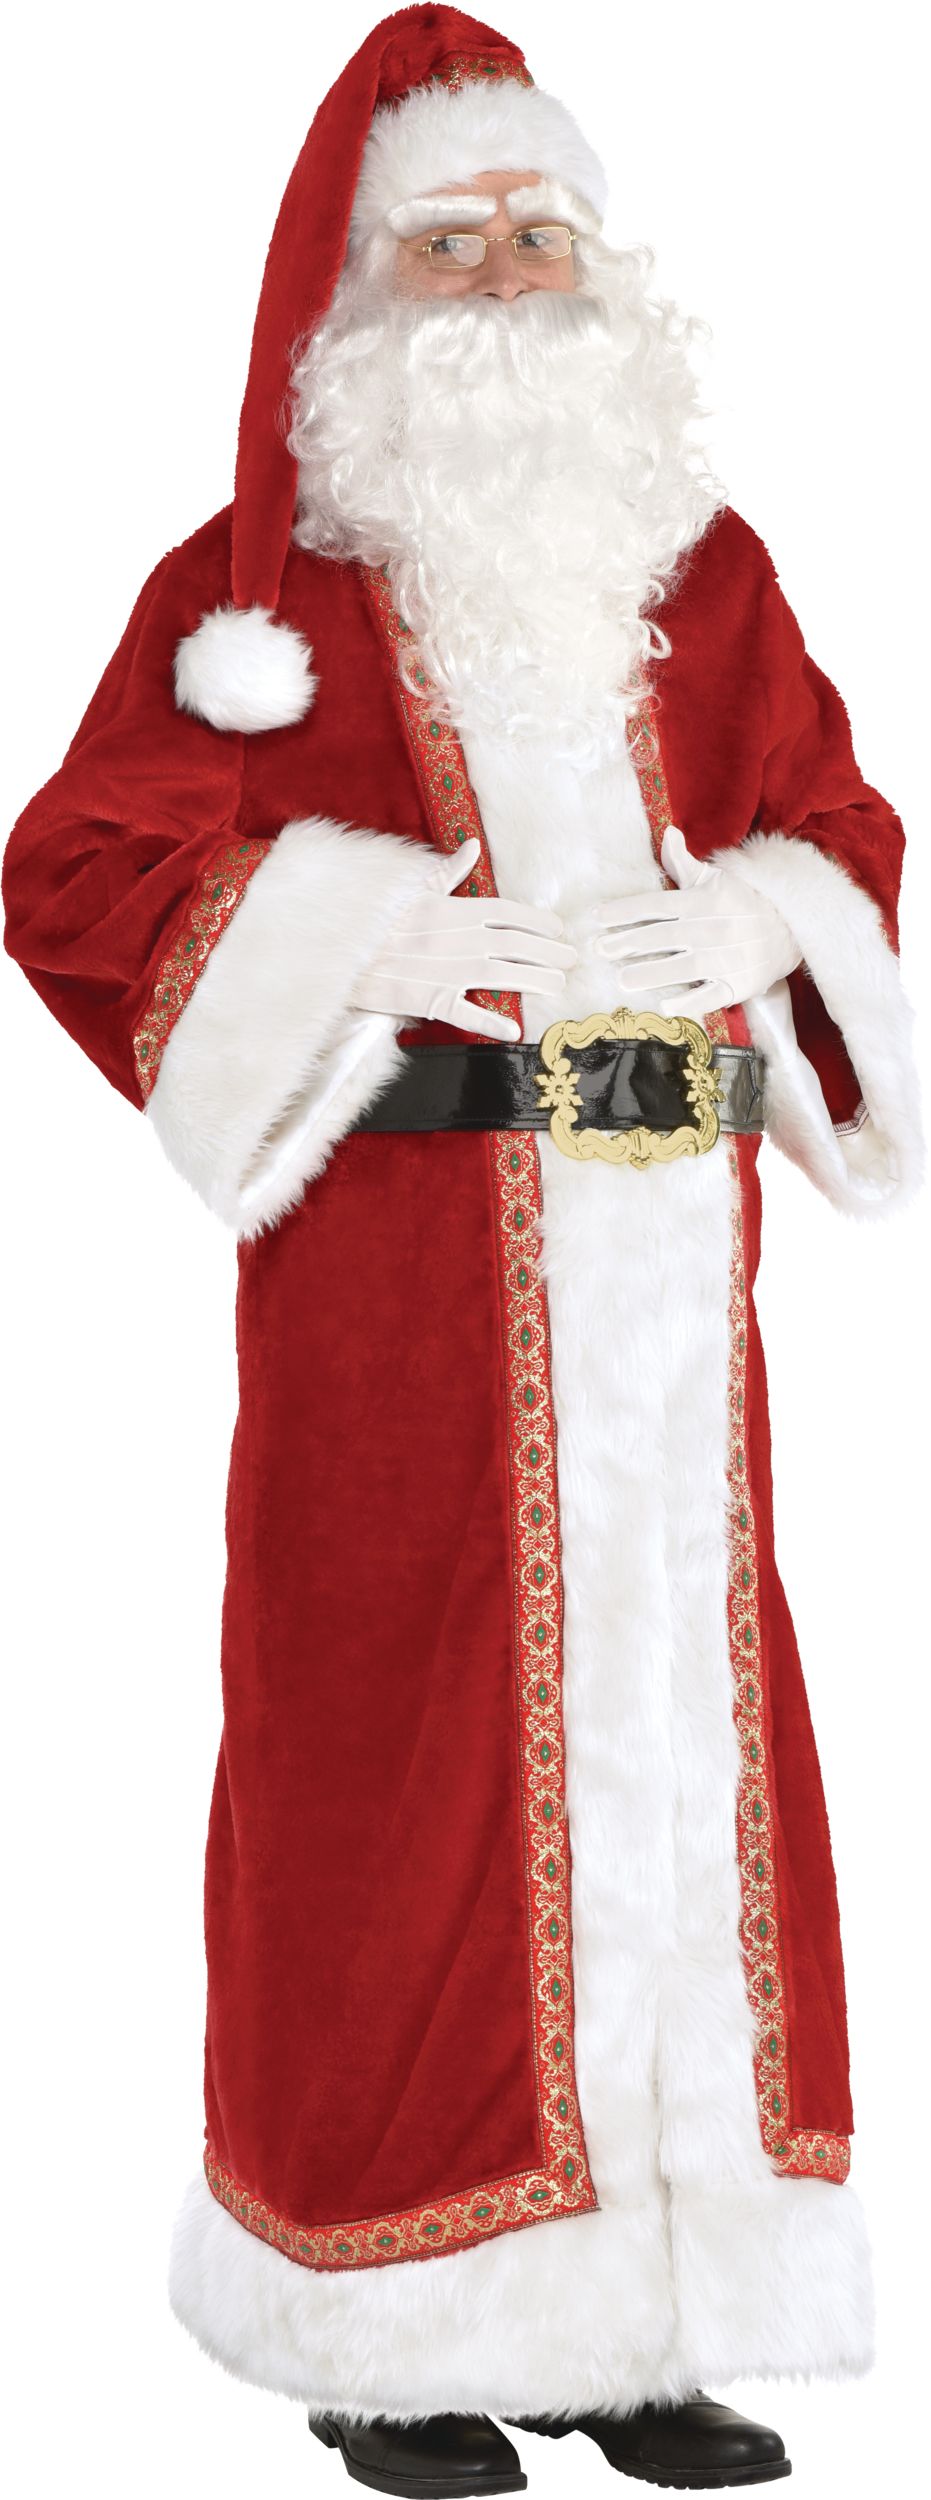 Who rents out Santa Claus/Father Christmas costume around Gbagada? |  Instagram